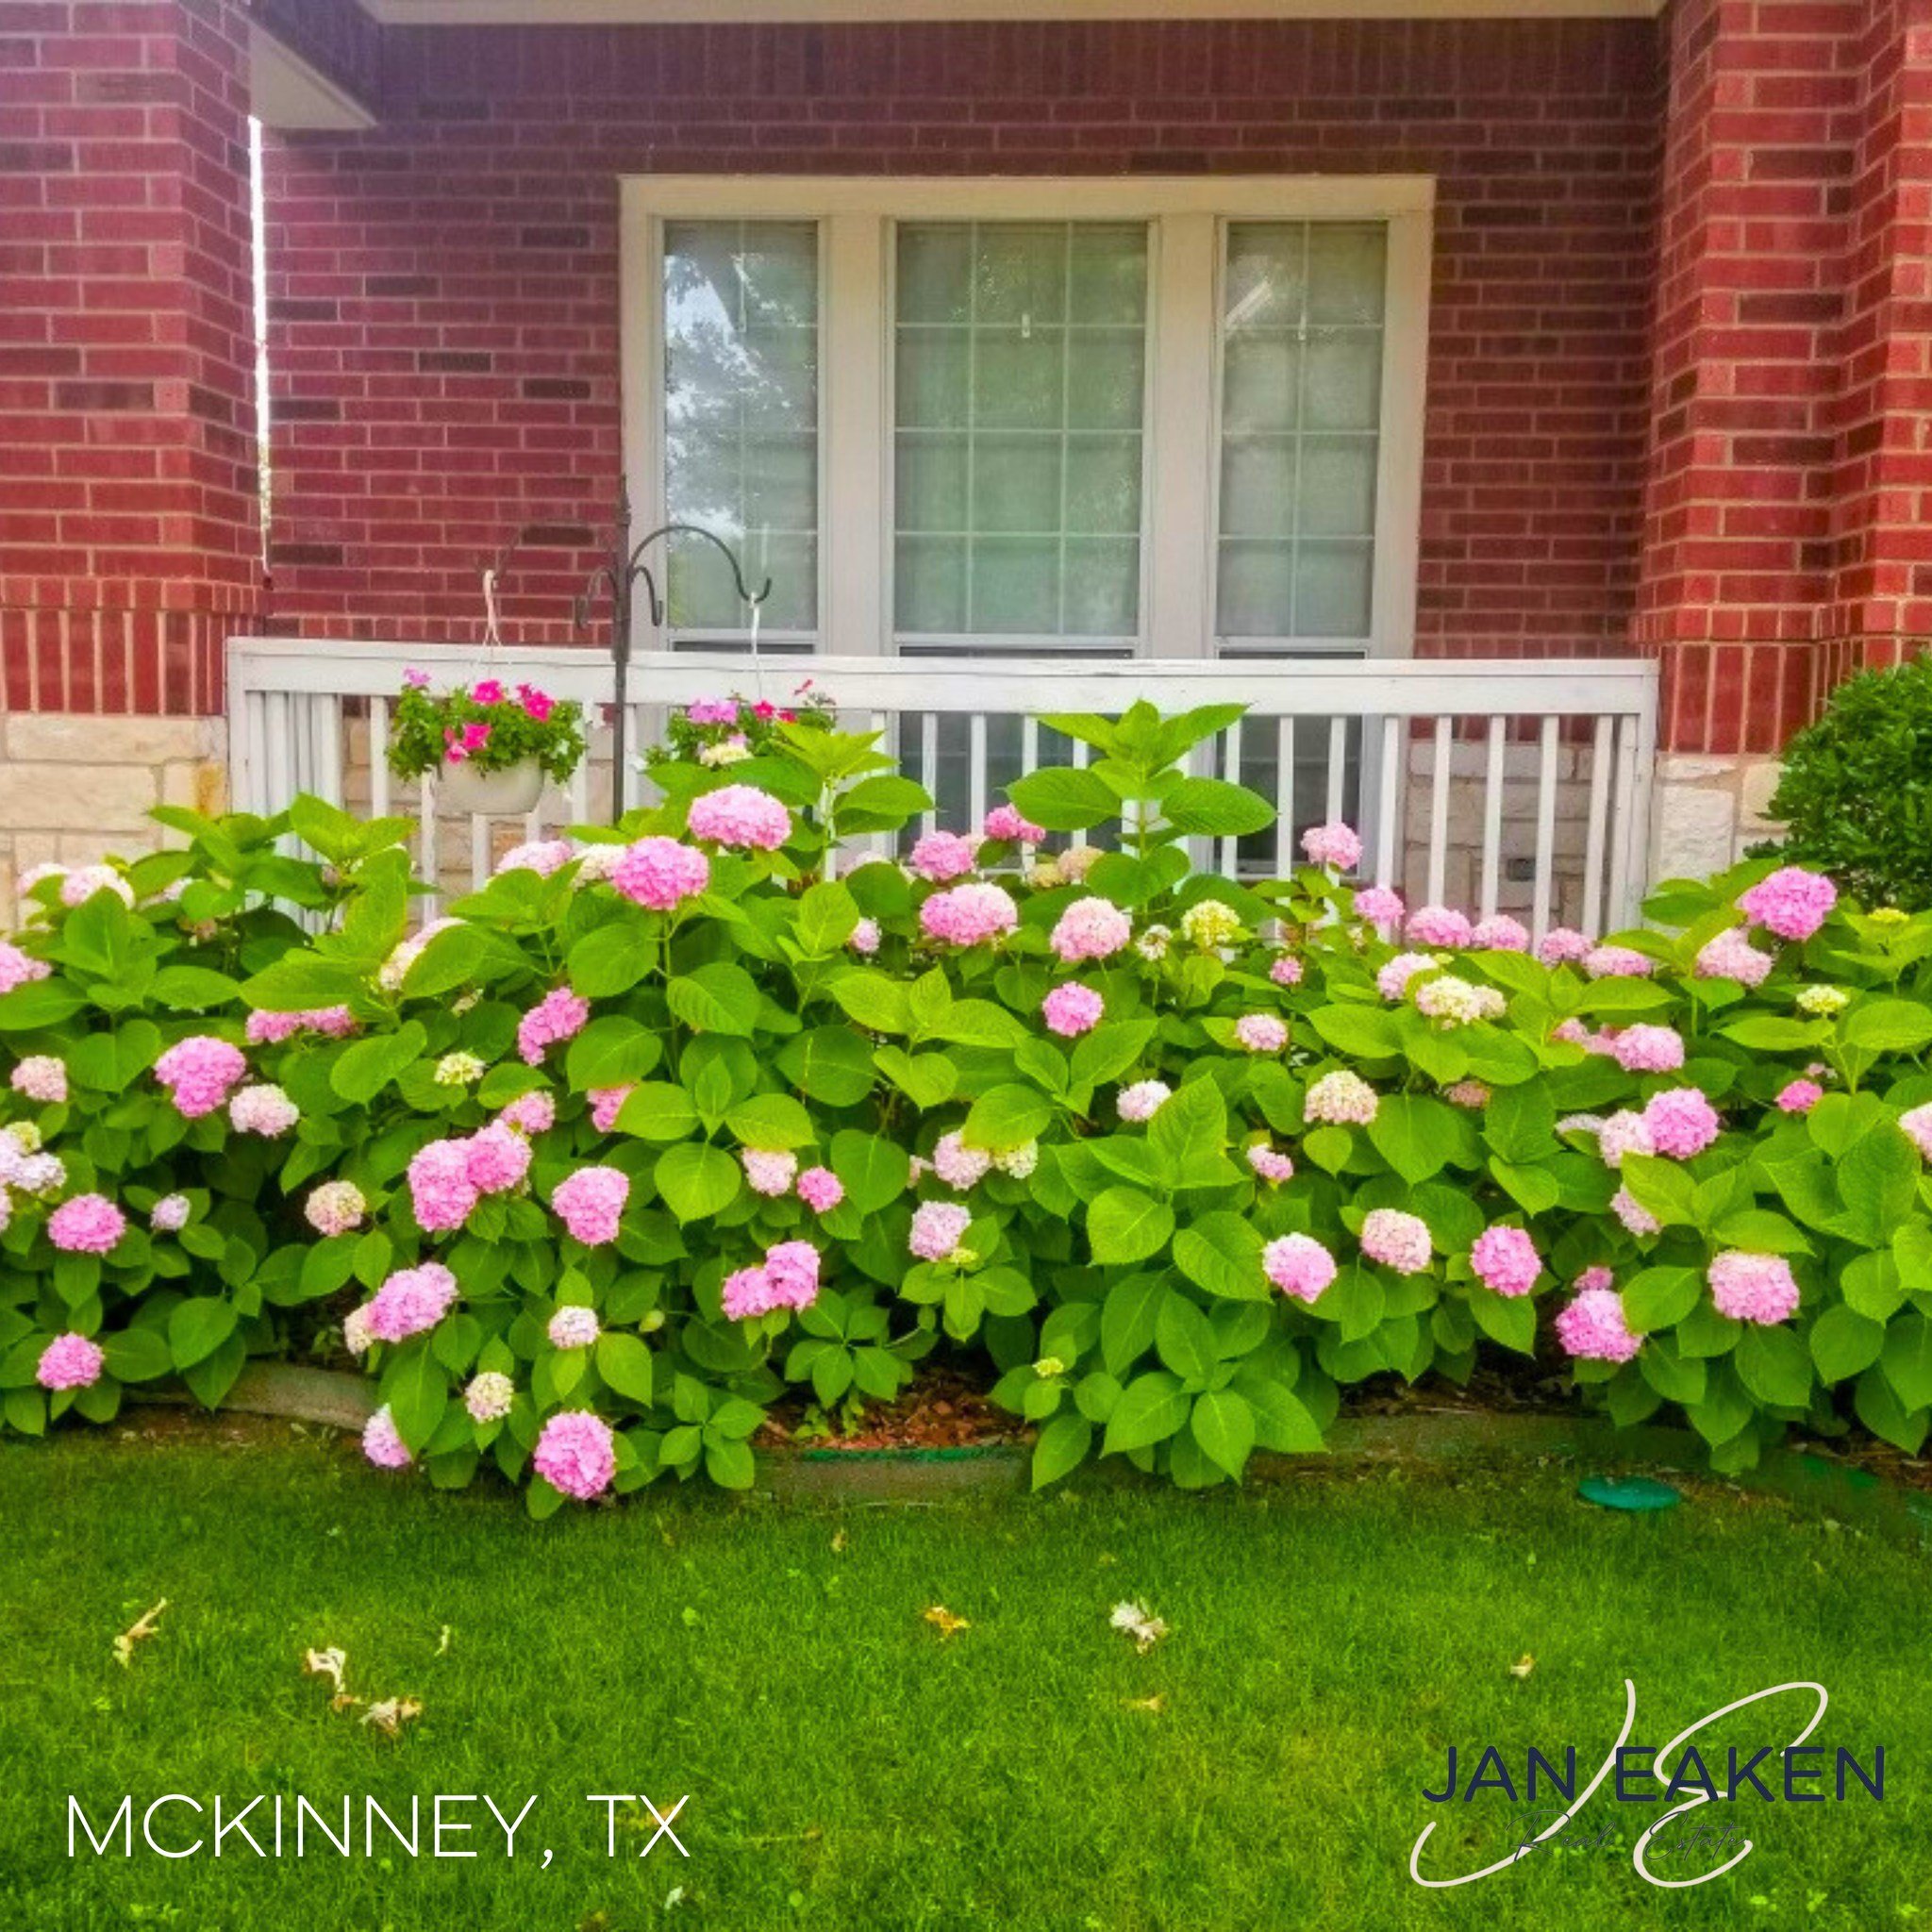 If you thought this home couldn't be any more beautiful, take a look at these stunning hydrangea bushes! This gorgeous home is available in McKinney: www.janeaken.com/featured-listings